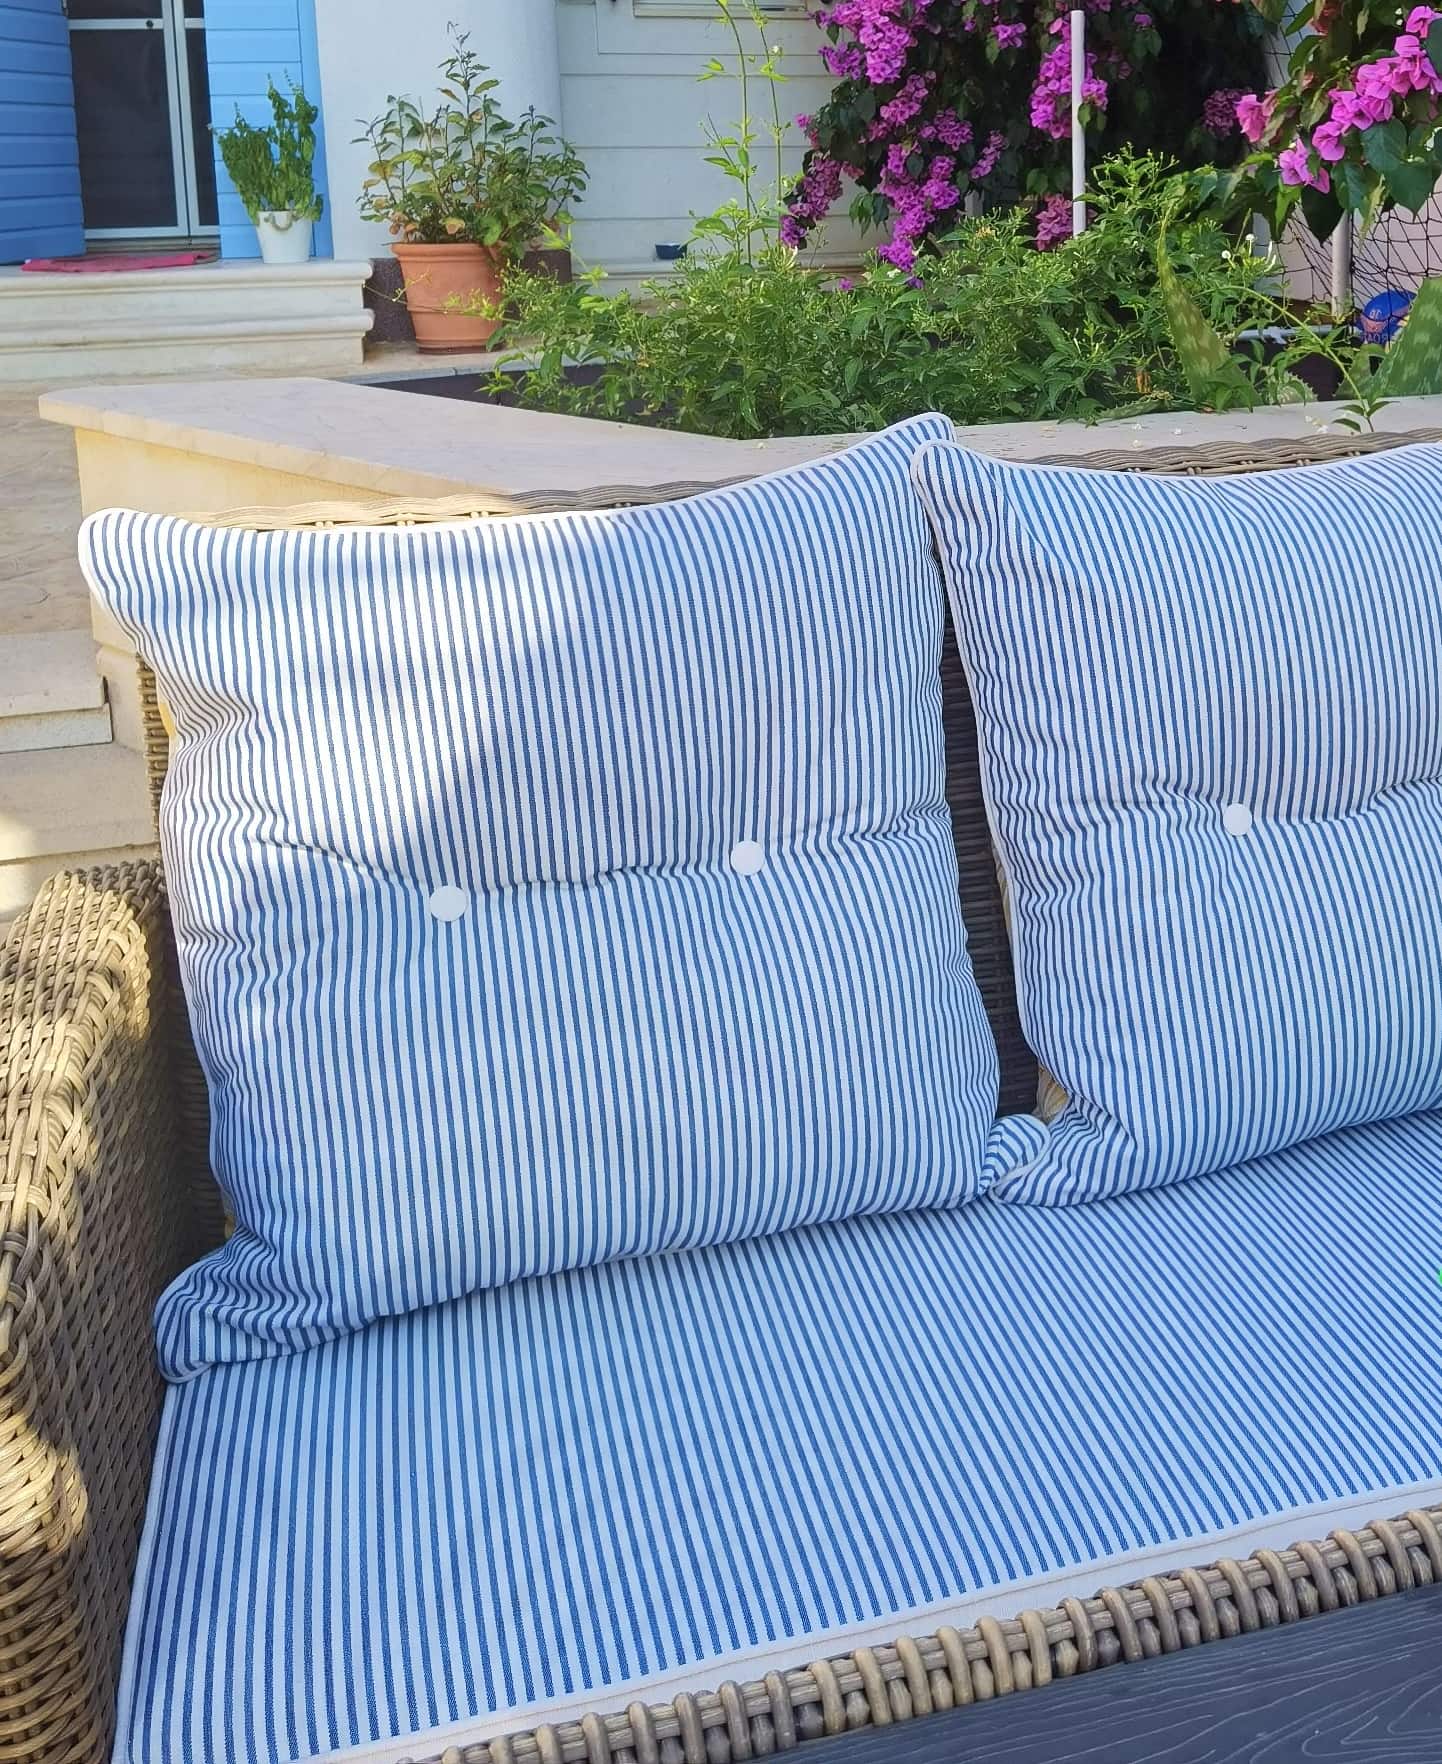 Frey outdoor garden cushions in blue white stripes with contrasting yellow palms. Incompatible motifs for perfect dual design.